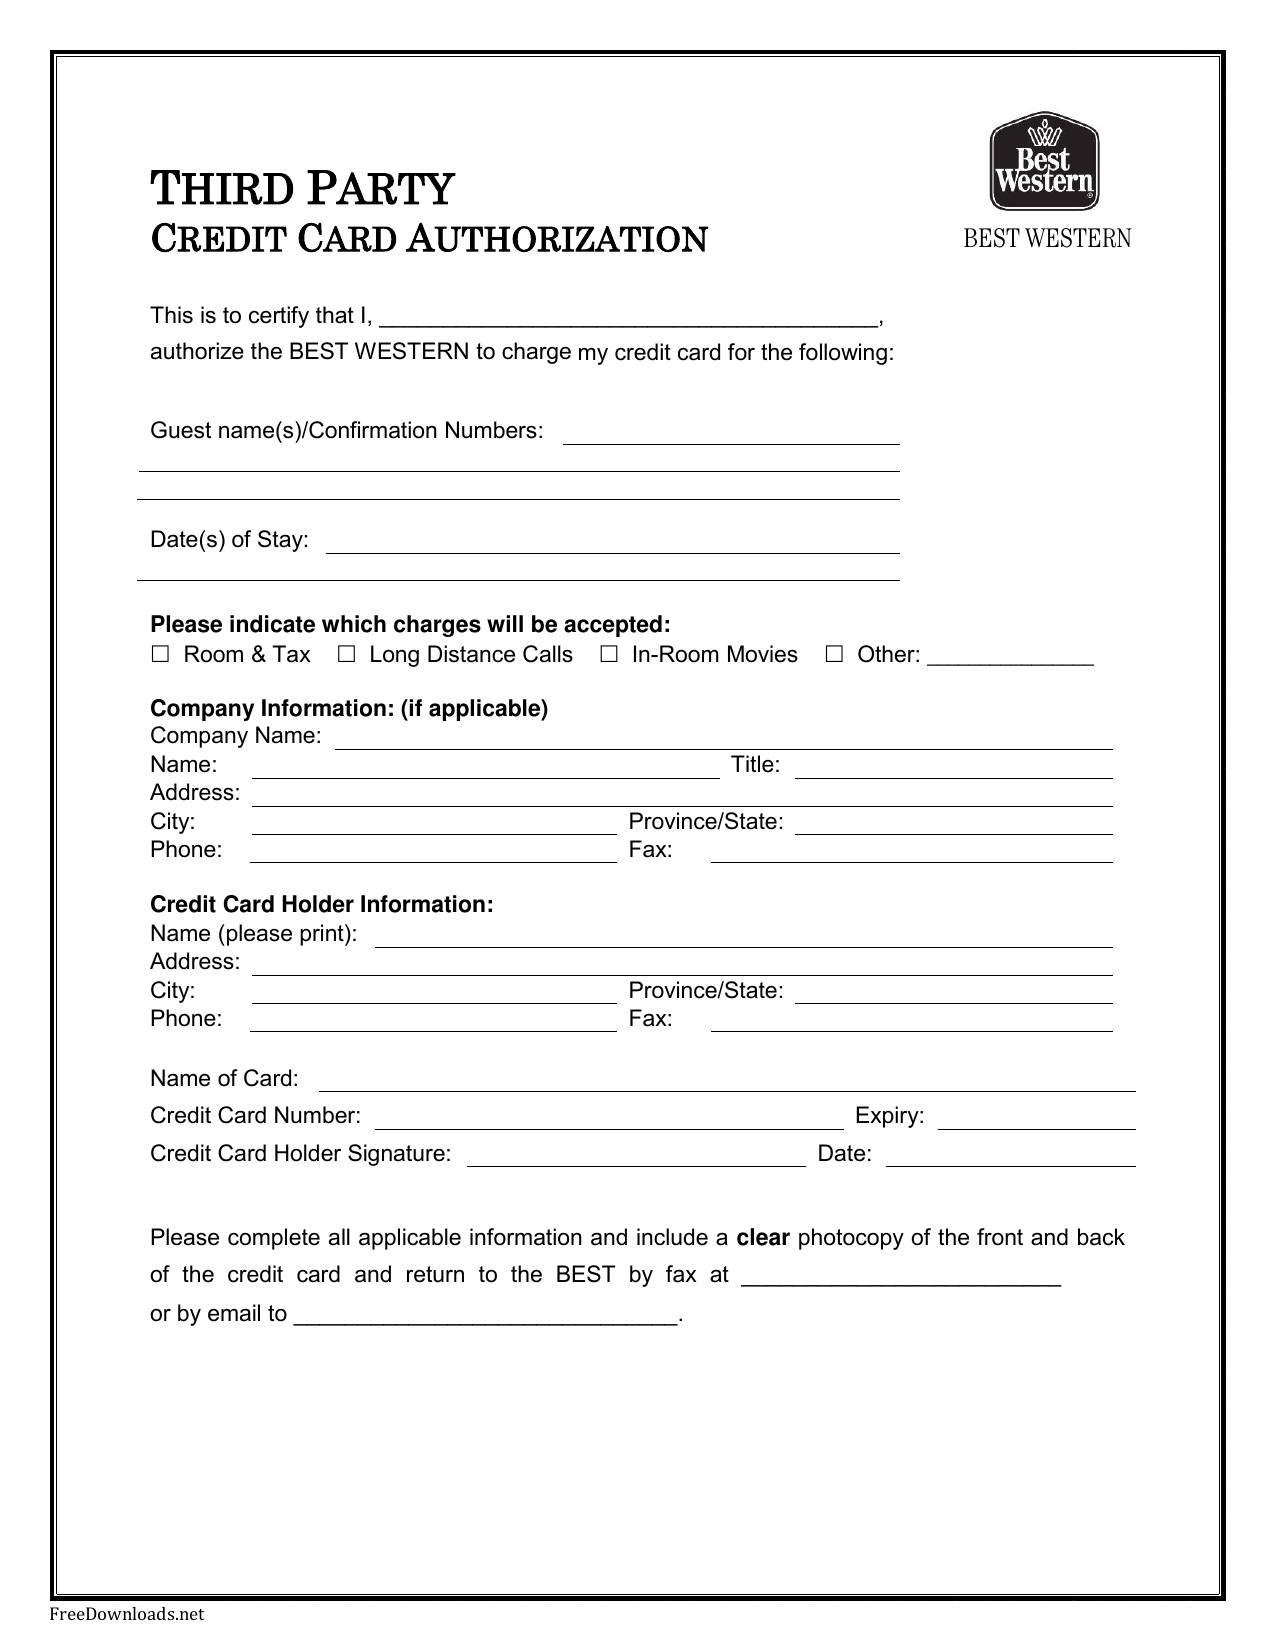 Download Best Western Credit Card Authorization Form With Regard To Credit Card Billing Authorization Form Template